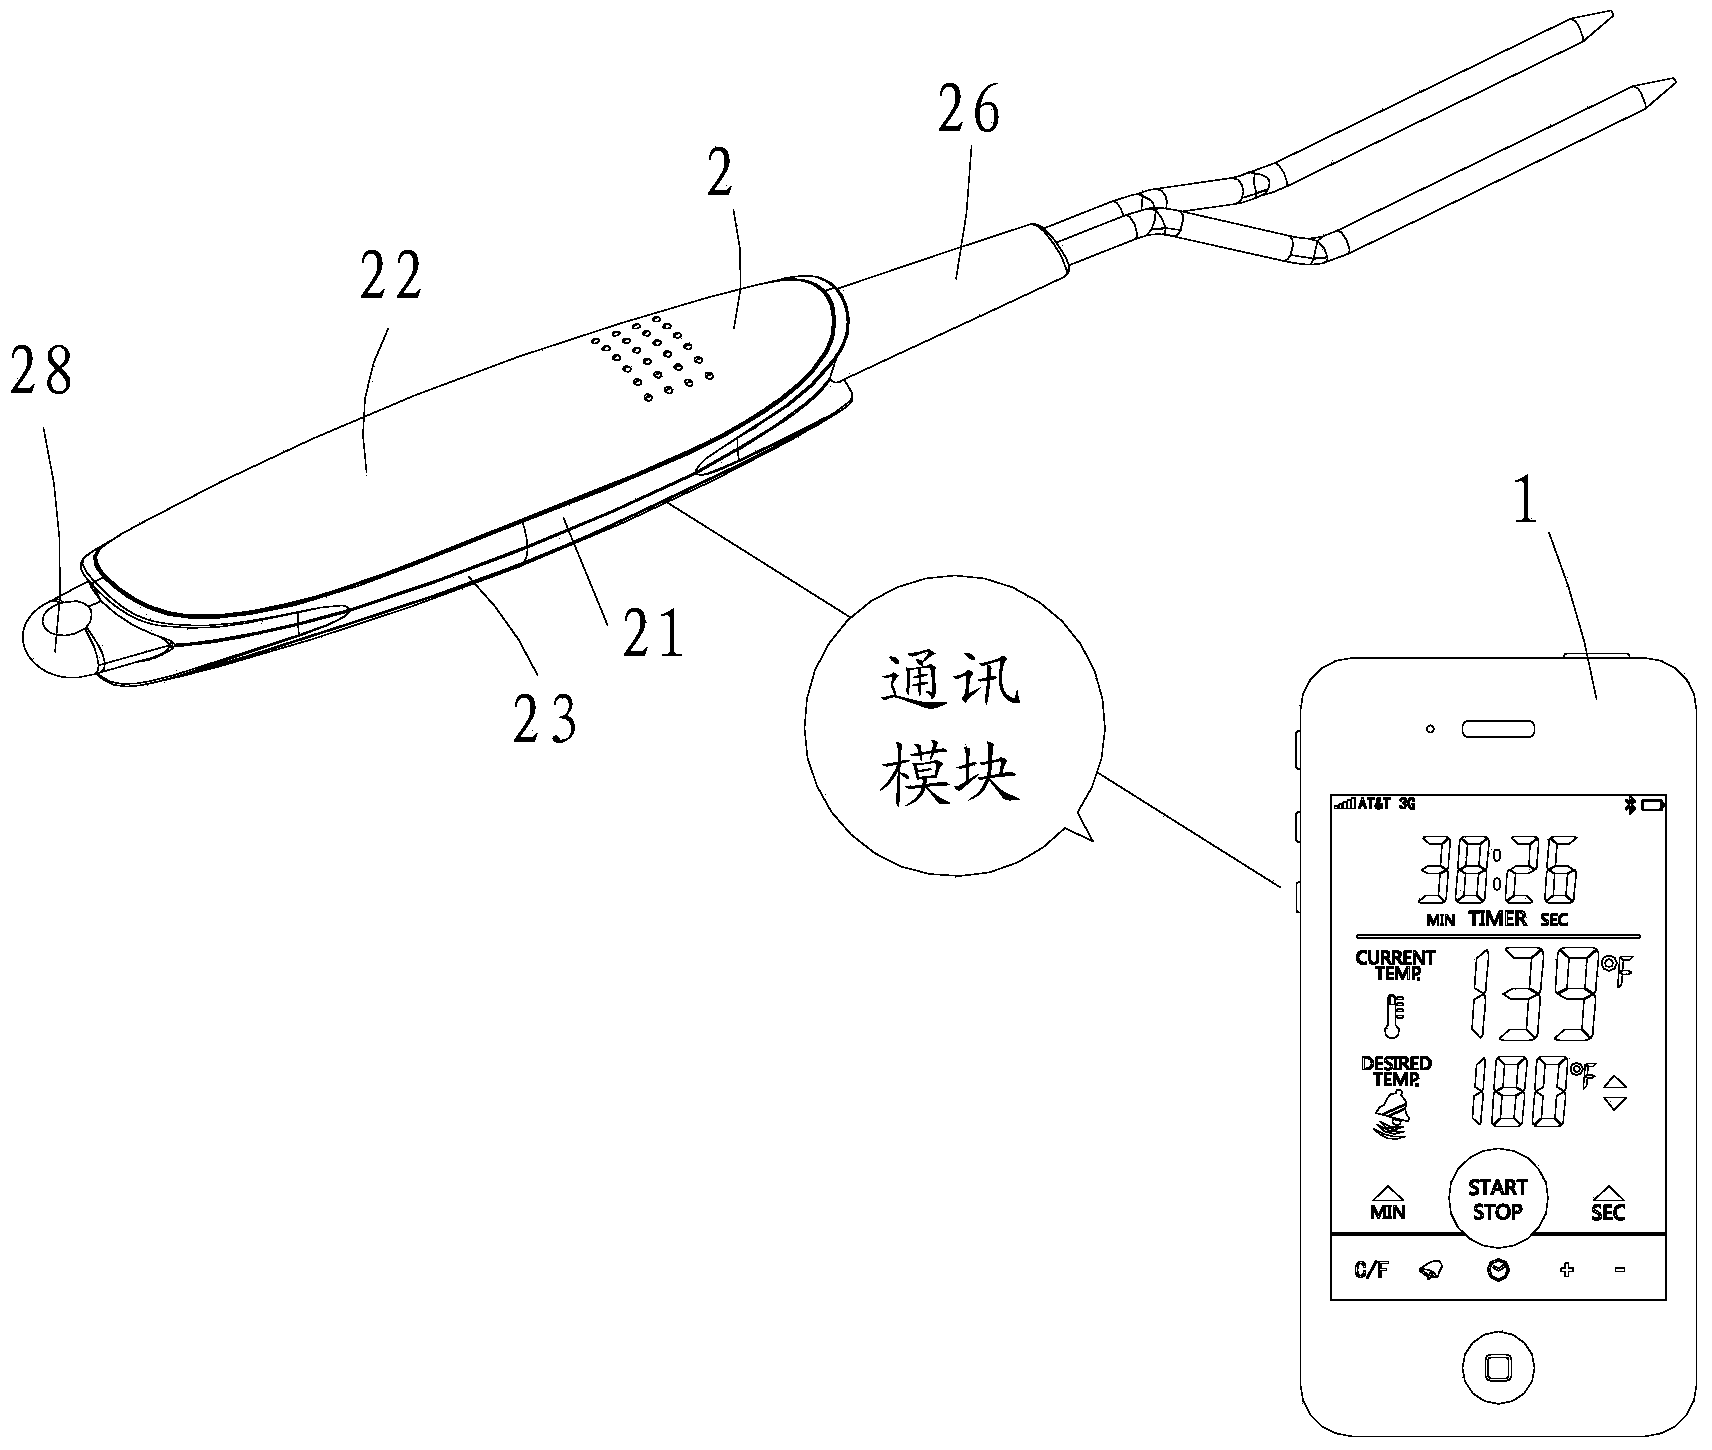 Method and equipment for displaying barbecuing data on handheld equipment